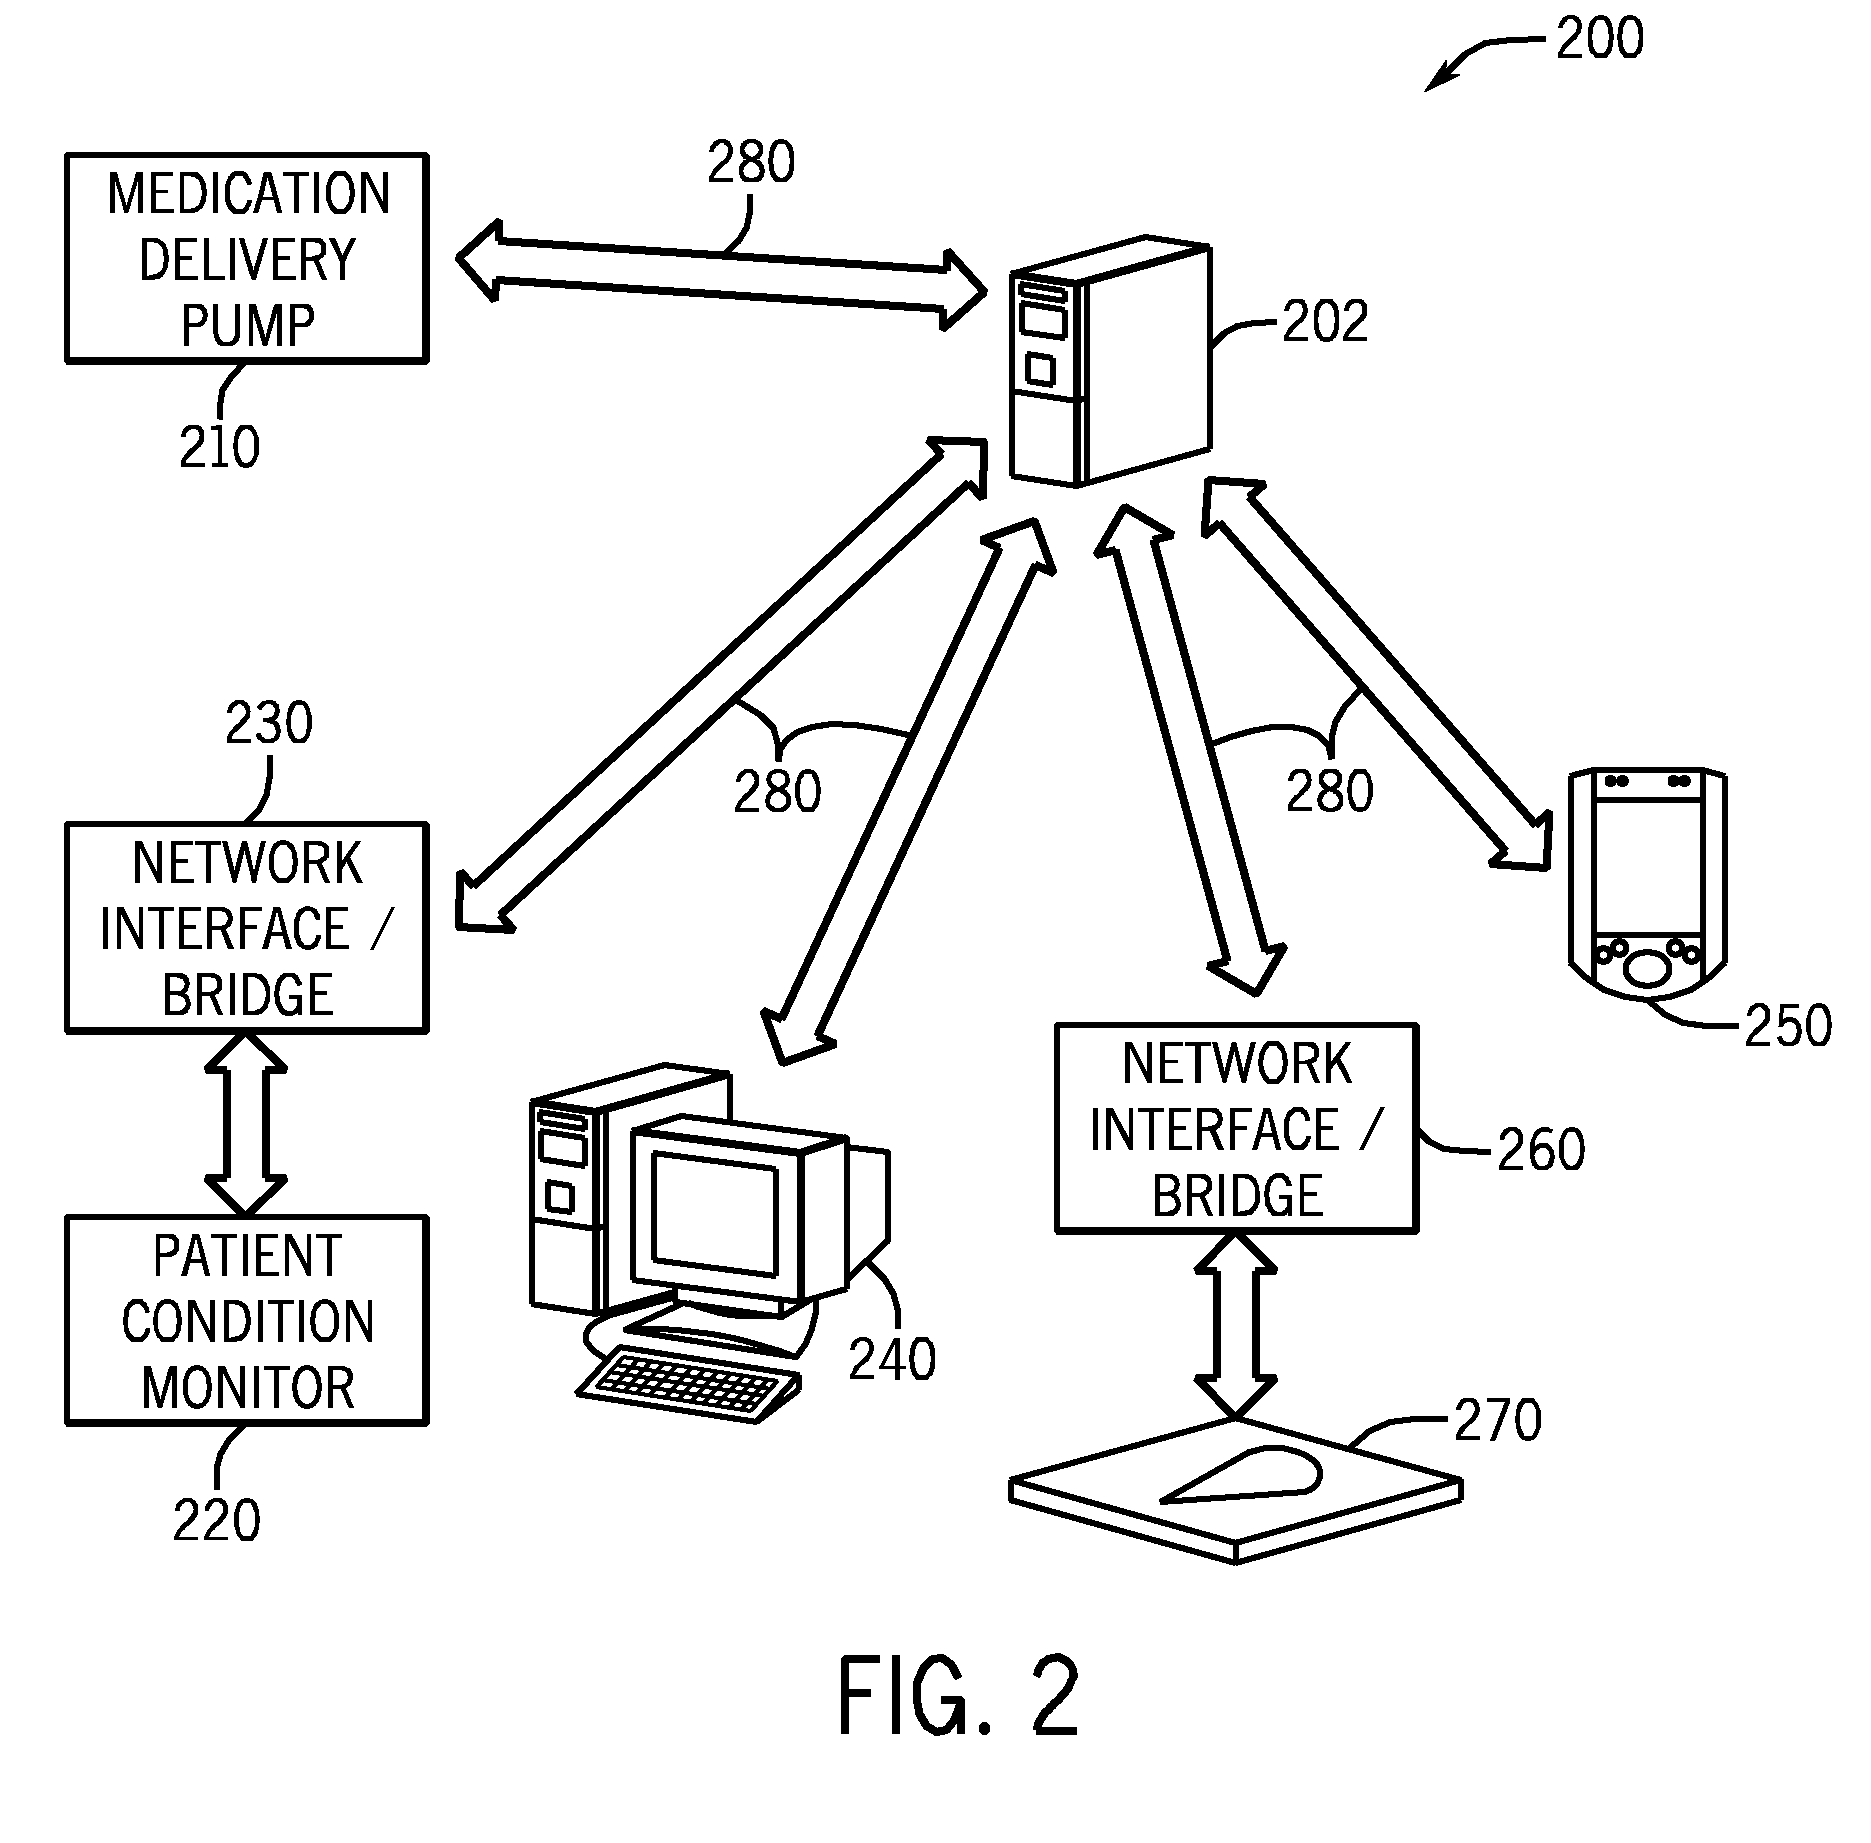 System and method for authorized medication delivery